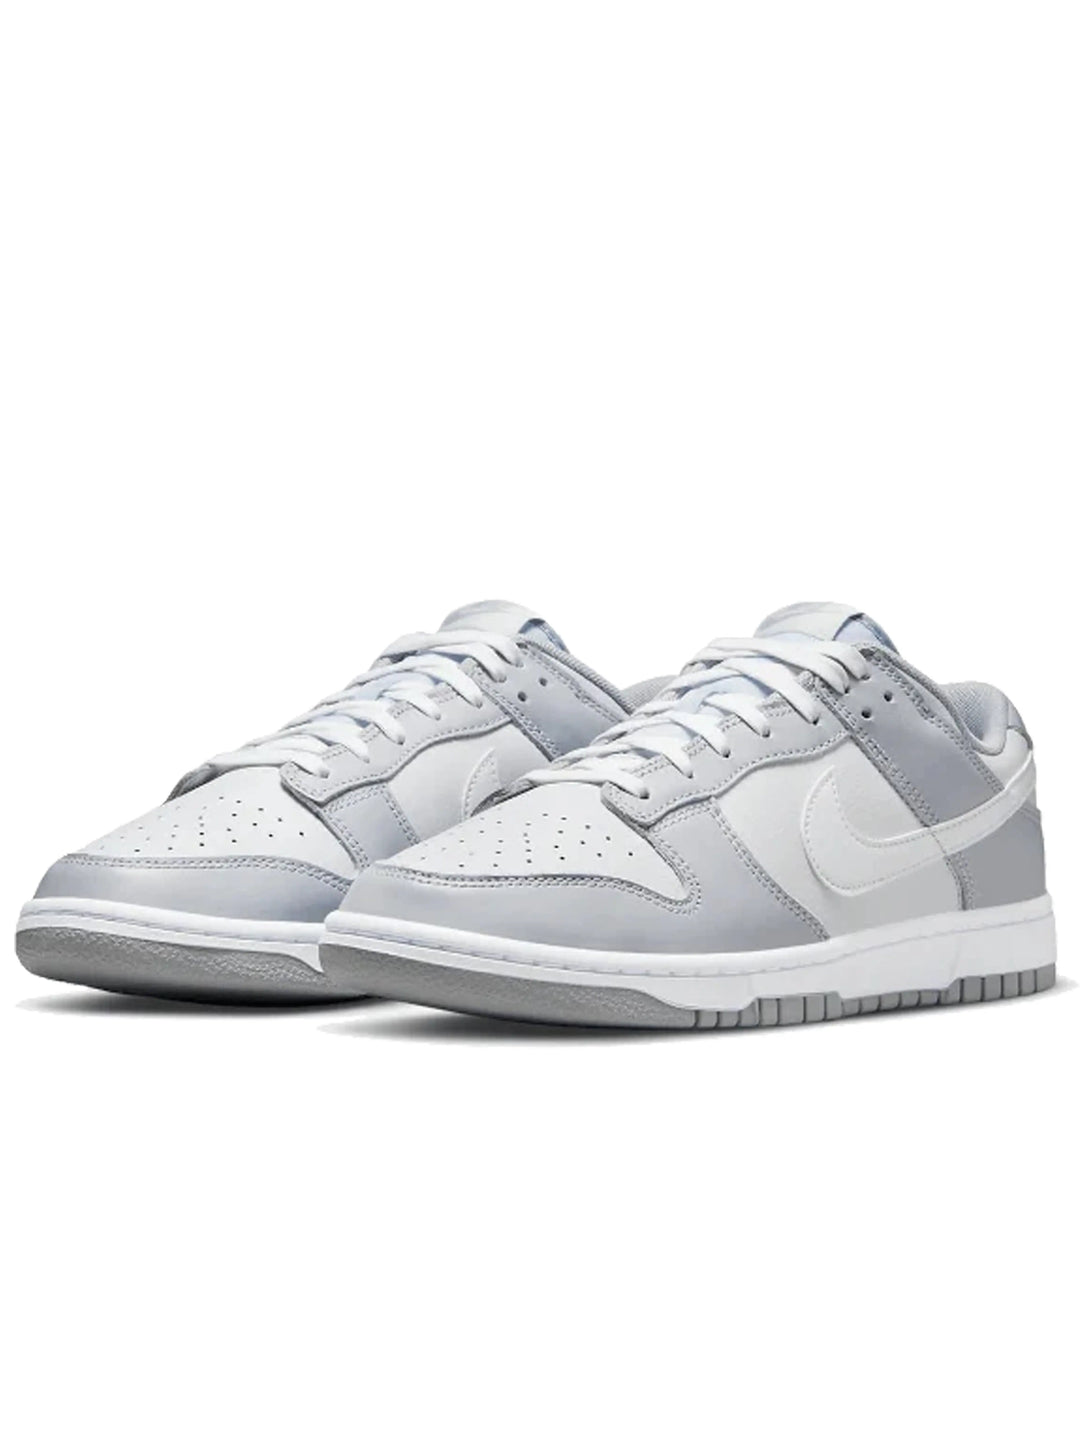 Nike Dunk Low Two Tone Grey Prior